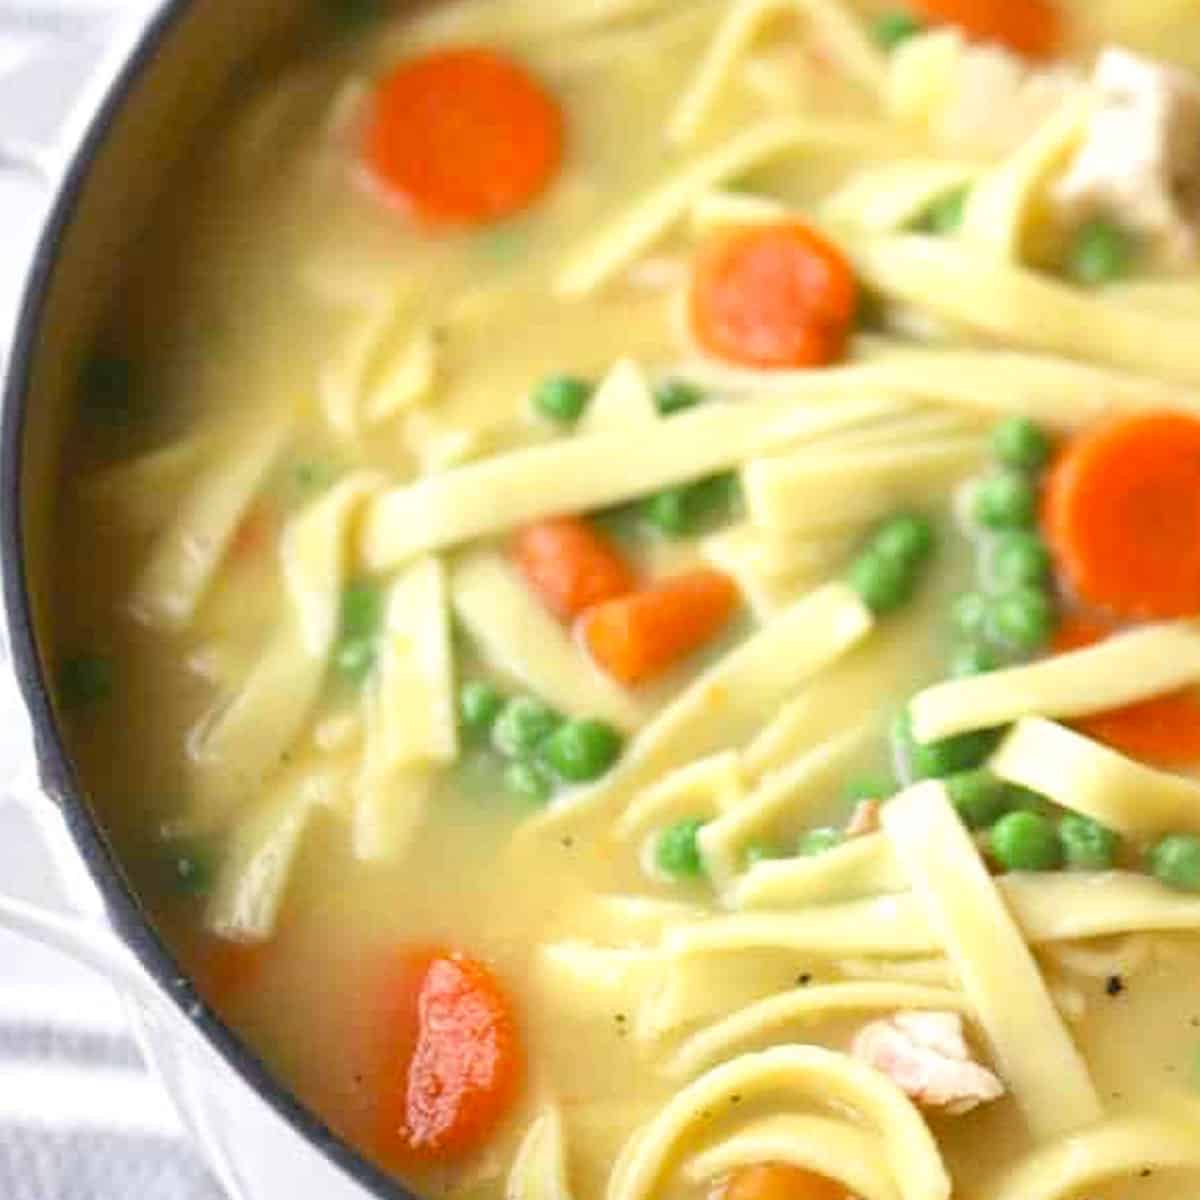 homestyle chicken noodle soup recipe, homemade chicken noodle soup with egg noodles.